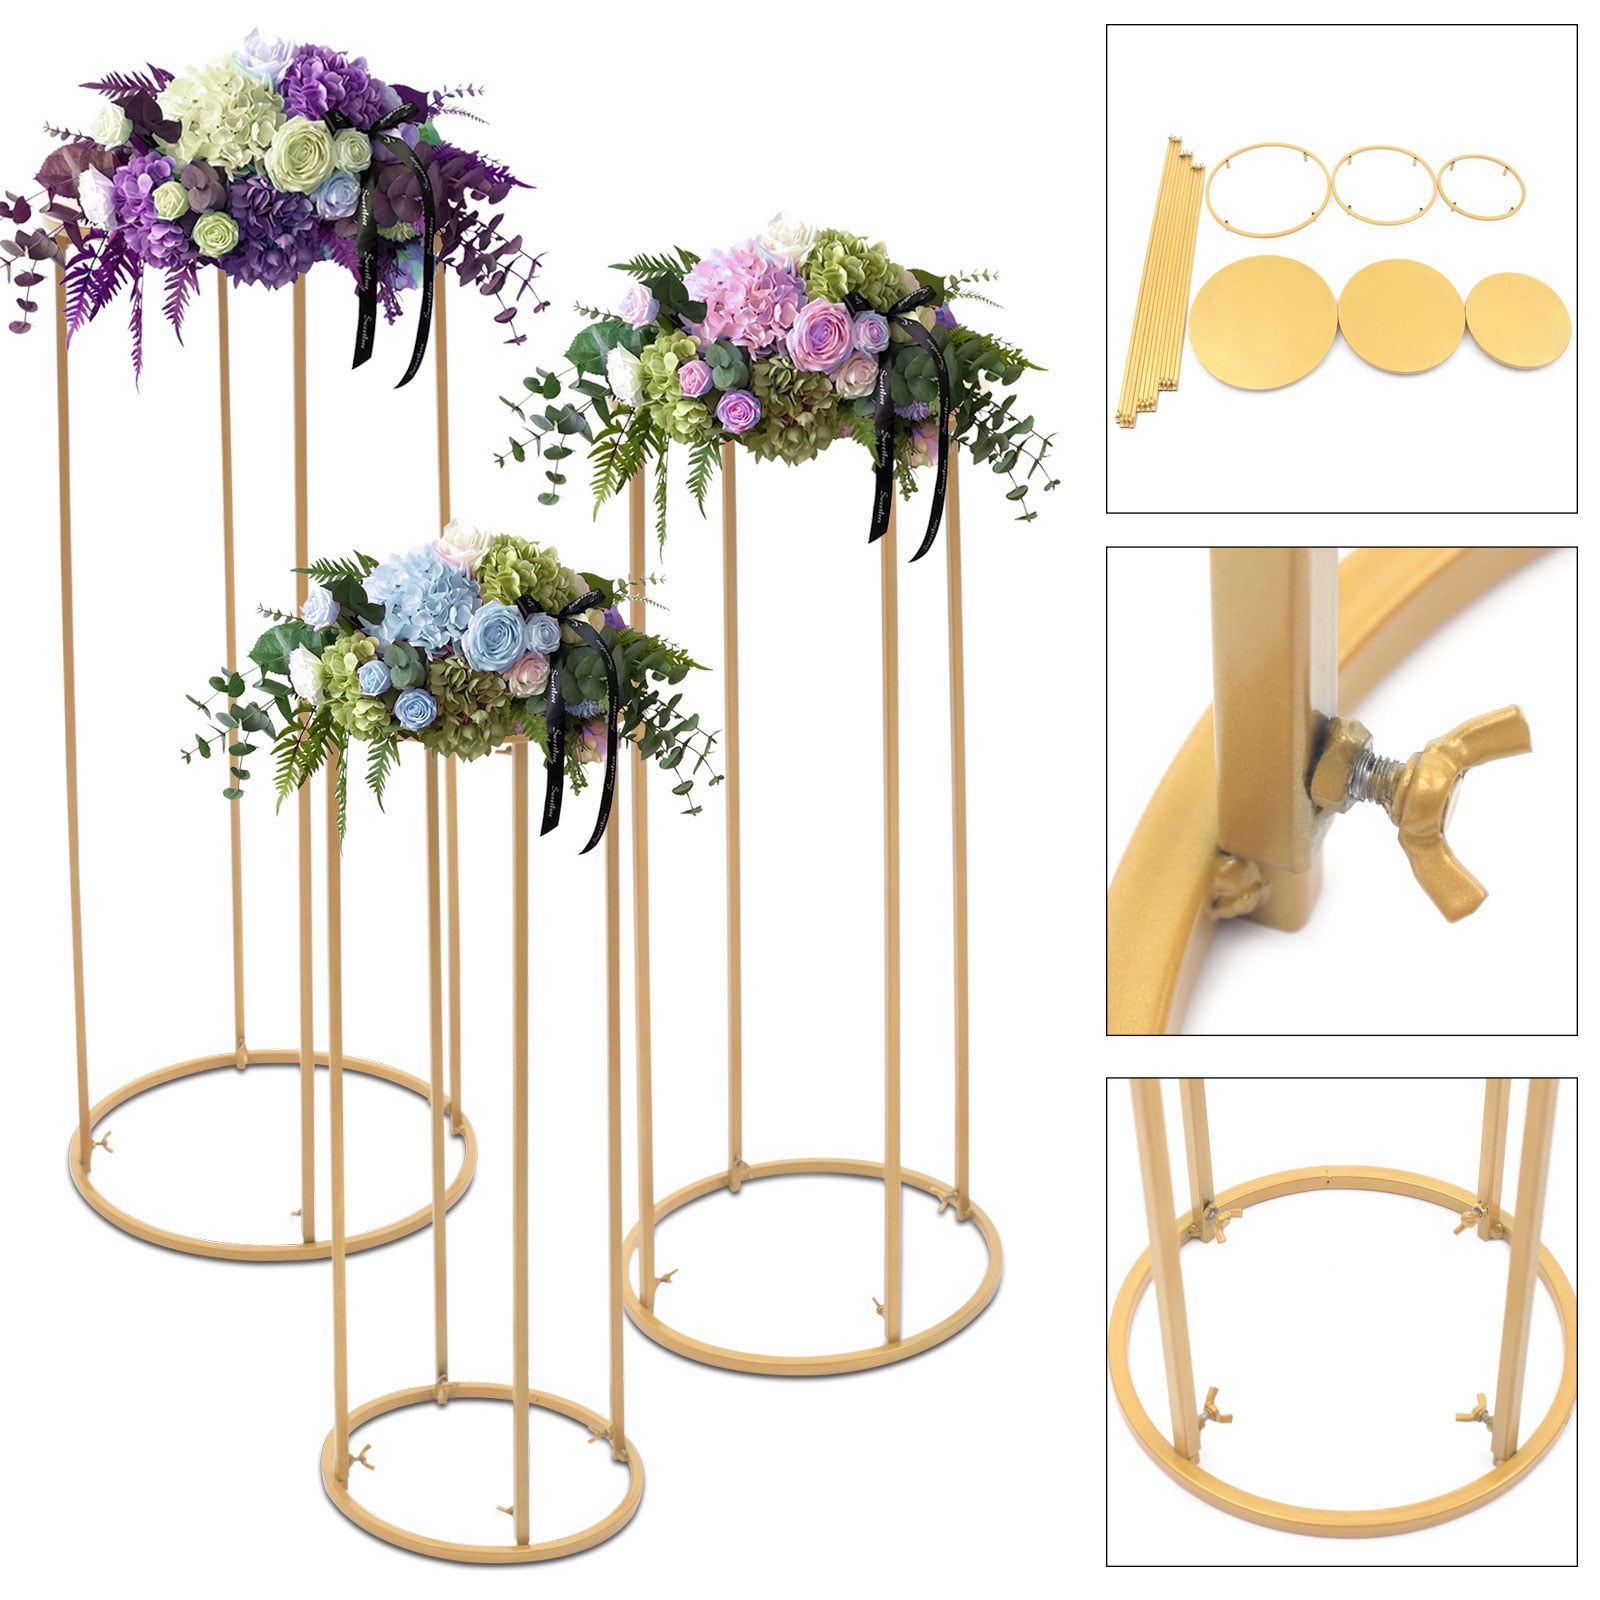 Hinged Flower Vase With Metal Tube Stand Perfect For Weddings, Kitchen, And  Indoor Home Decor From Seekae, $31.88